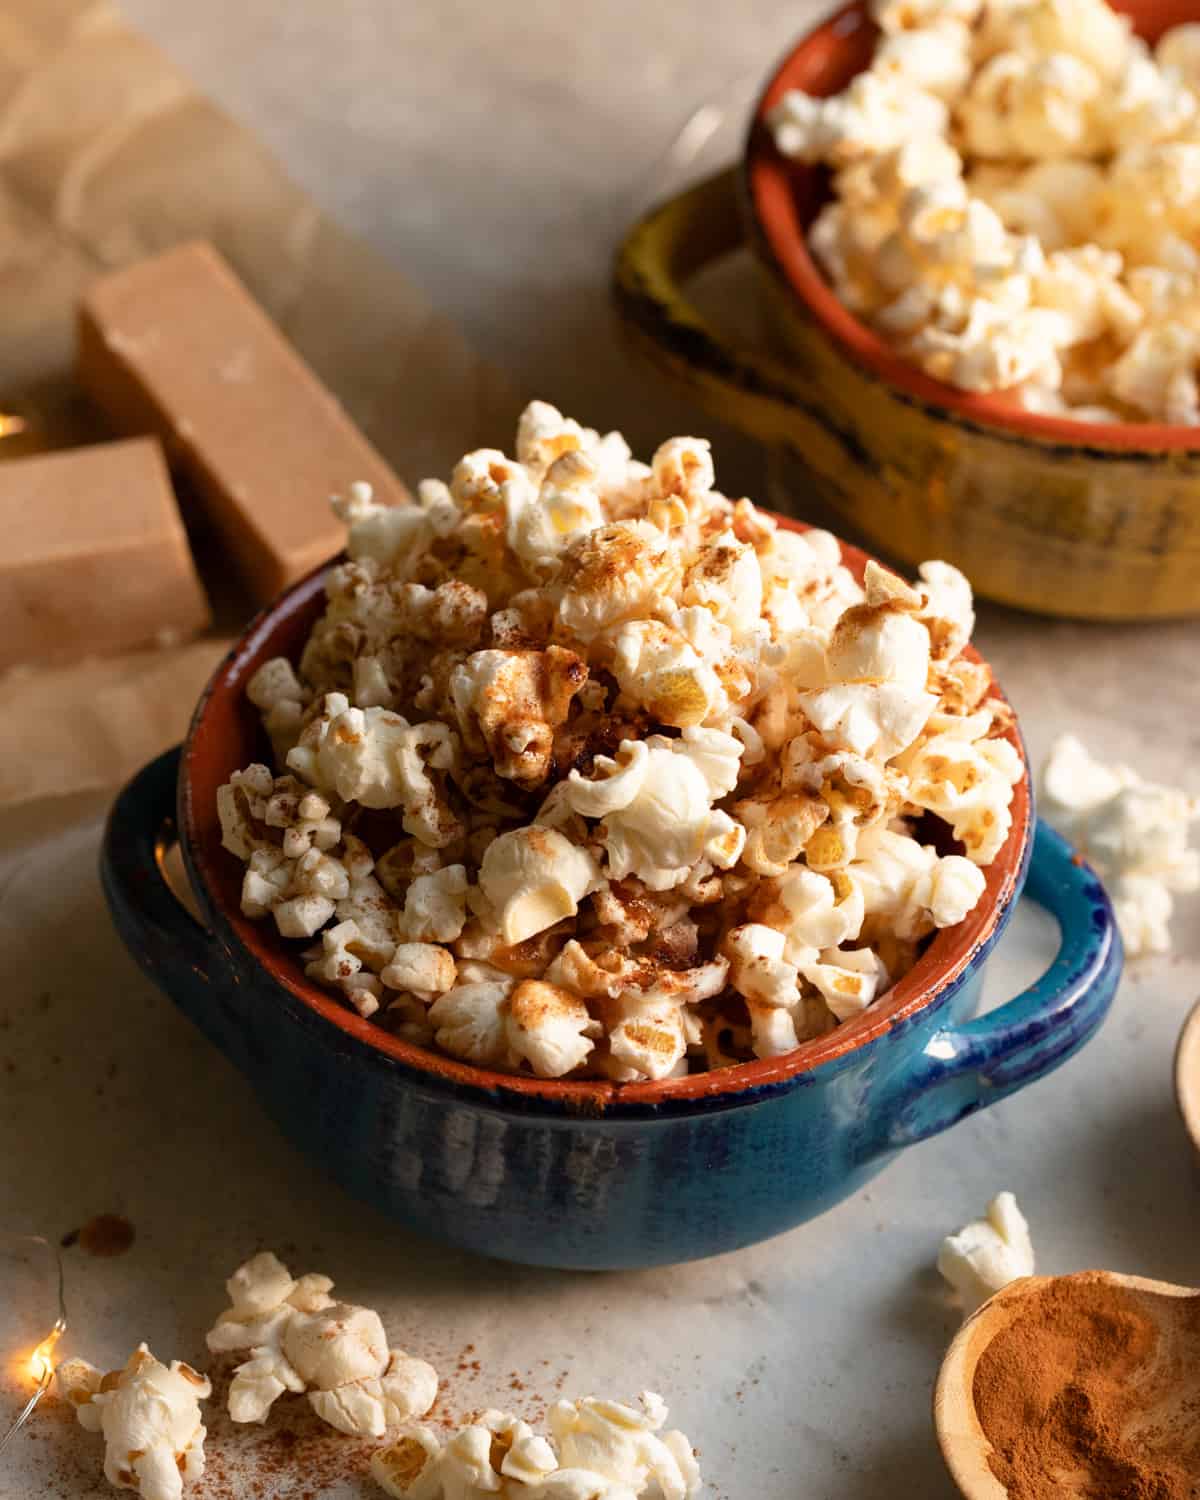 Close up image of a bowl of vegan cinnamon popcorn. The image is cozy and festive.